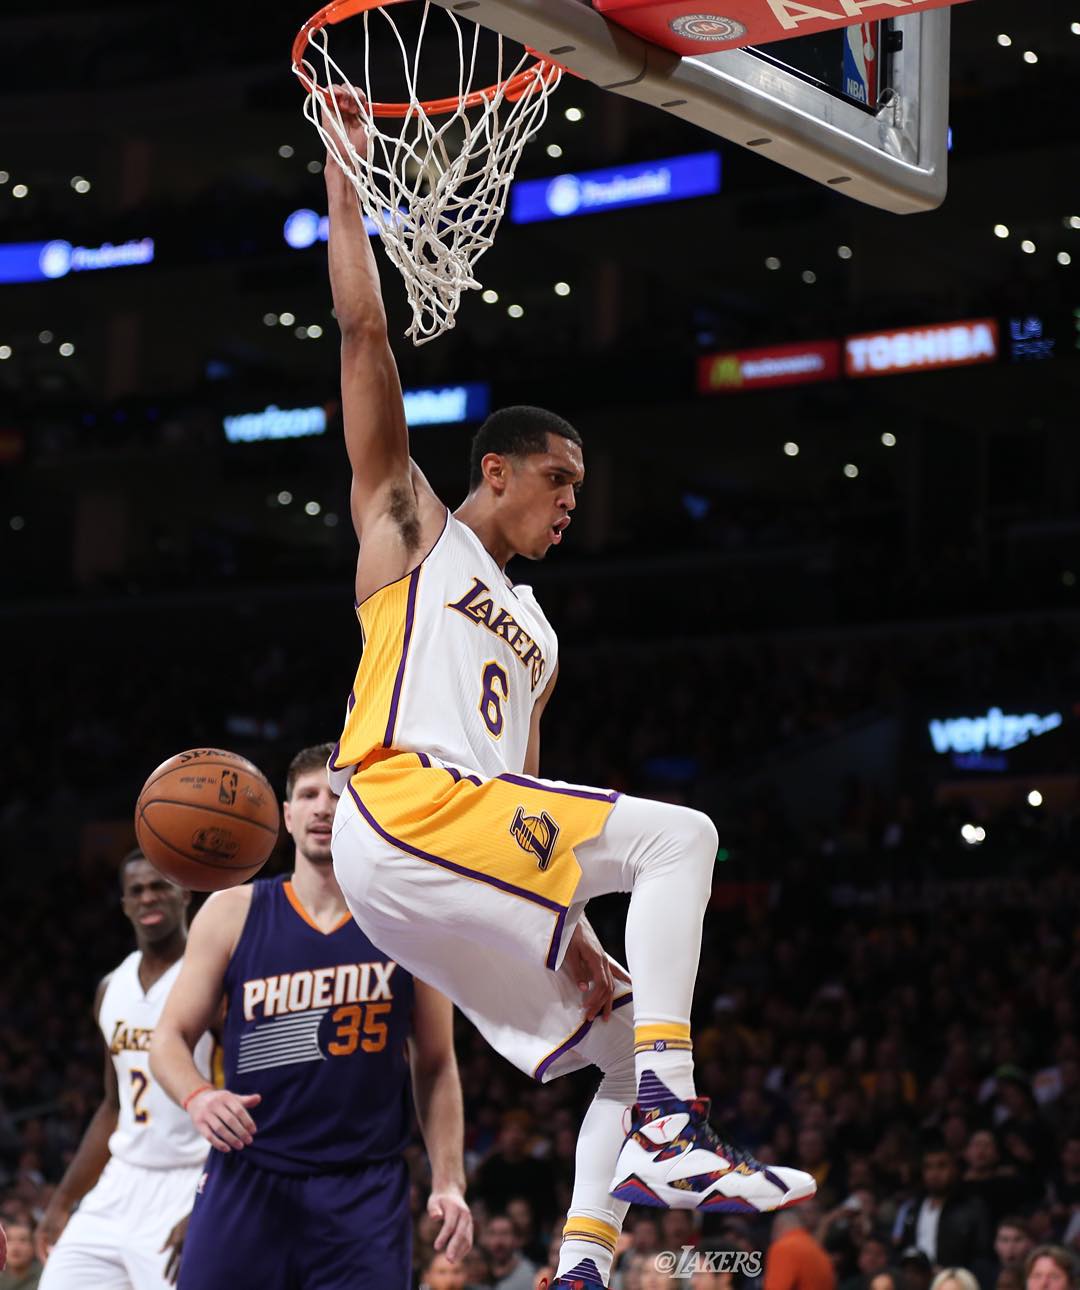 Jordan Clarkson #NBAVOTE by lakers. I've made up my mind. It's